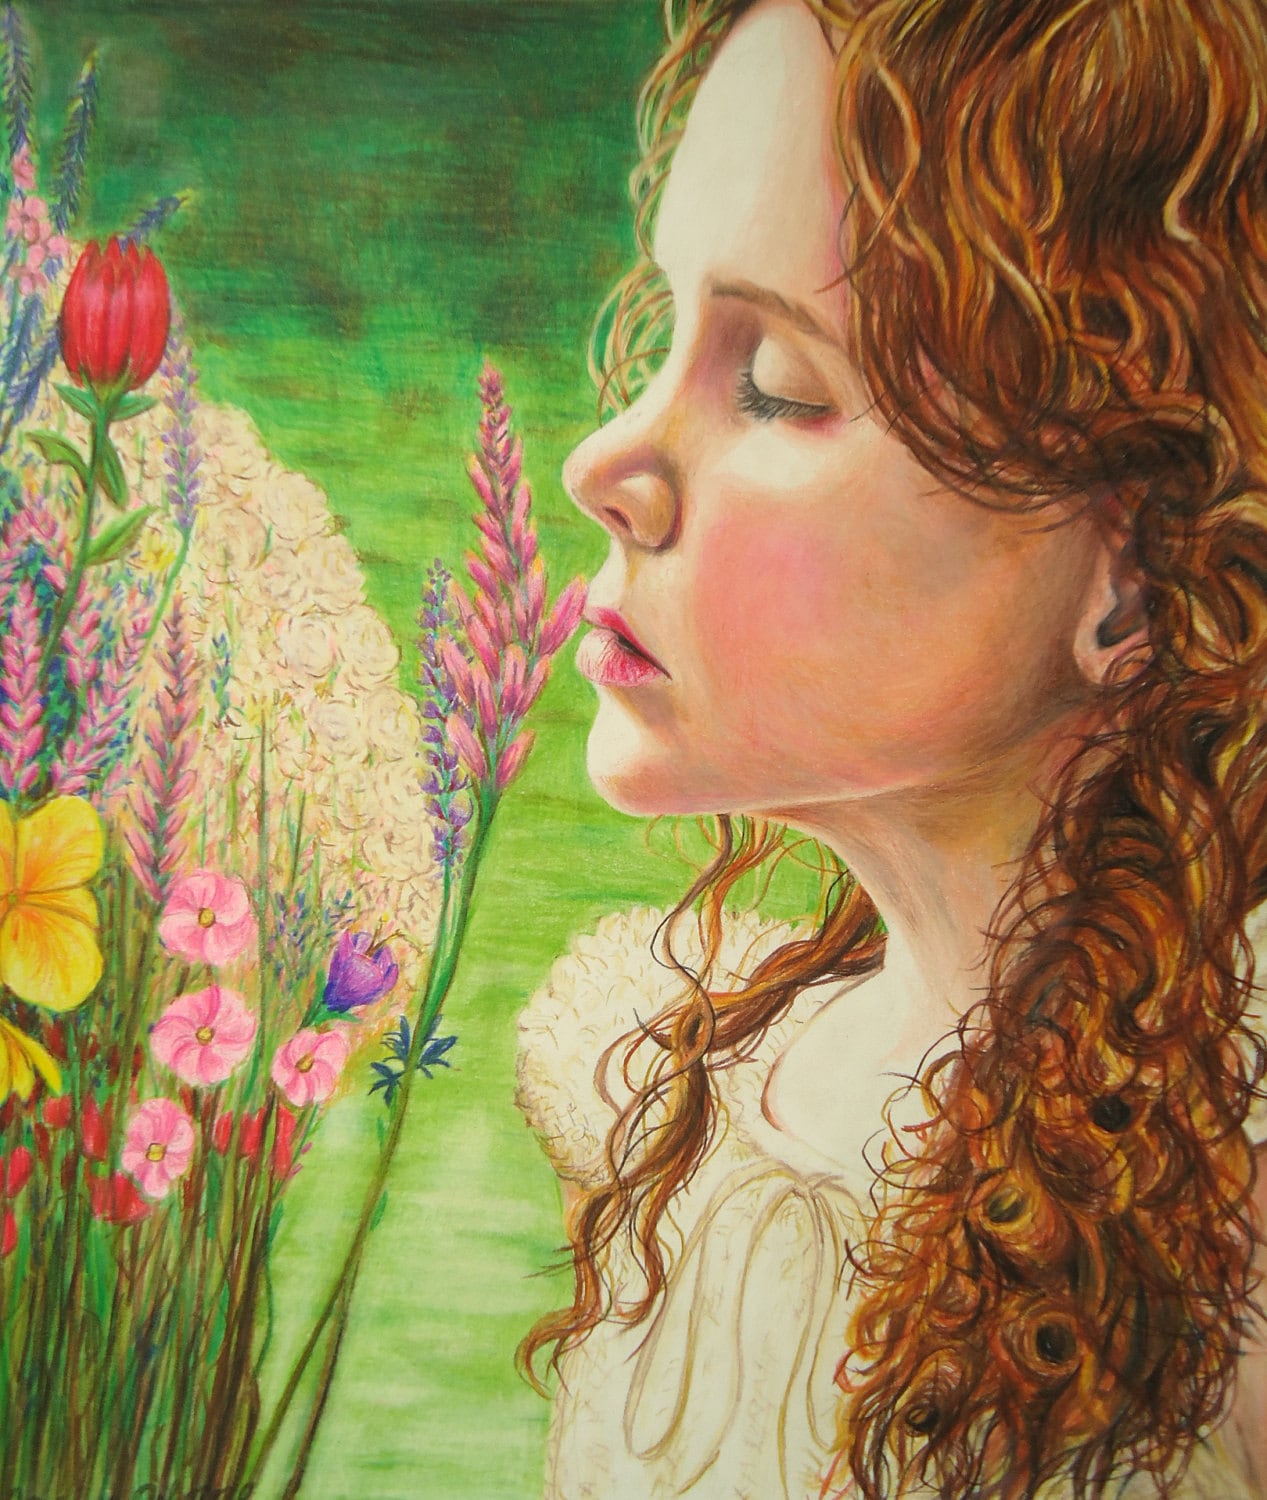 Magical colored pencil drawing titled 'Awake'